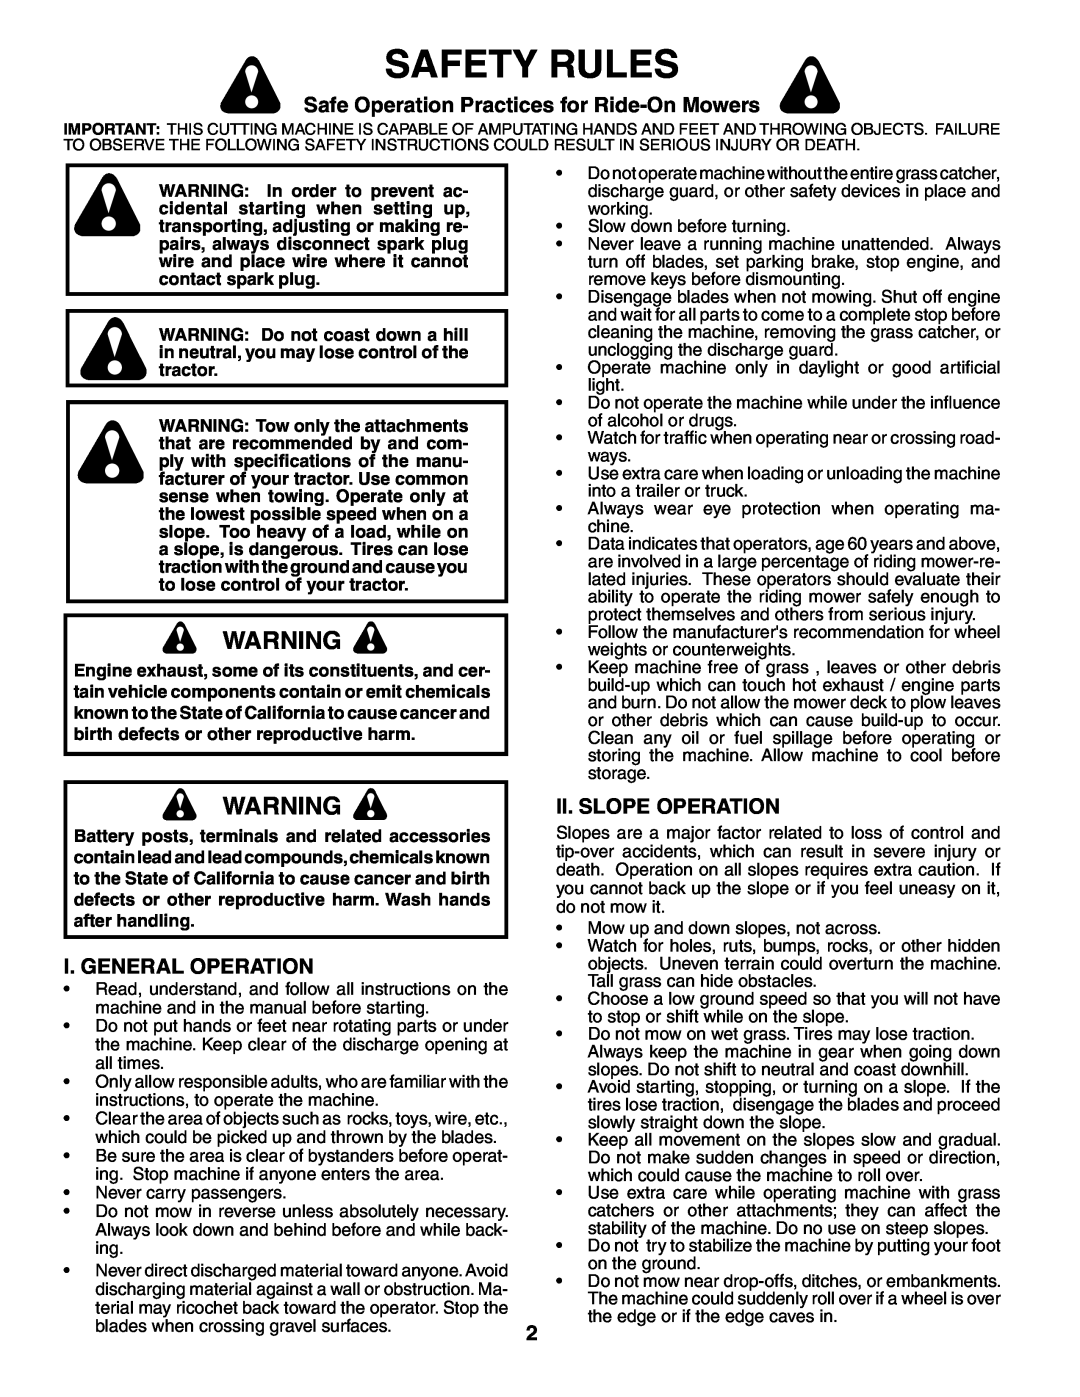 Poulan PK19H42LT Safety Rules, Safe Operation Practices for Ride-On Mowers, I. General Operation, Ii. Slope Operation 